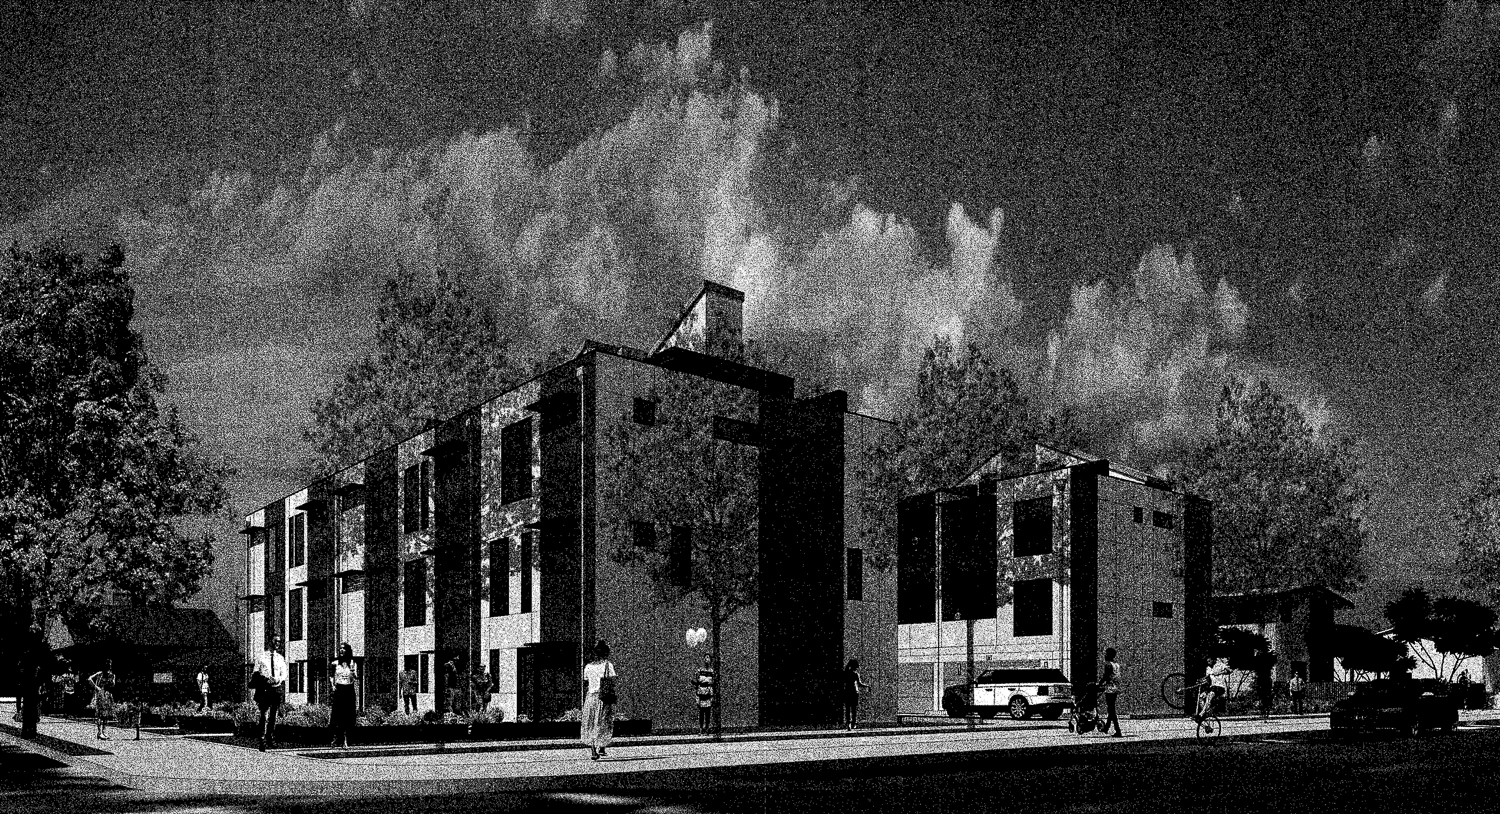 797 South Almaden Avenue low-resolution photocopy, rendering by Lowney Architects